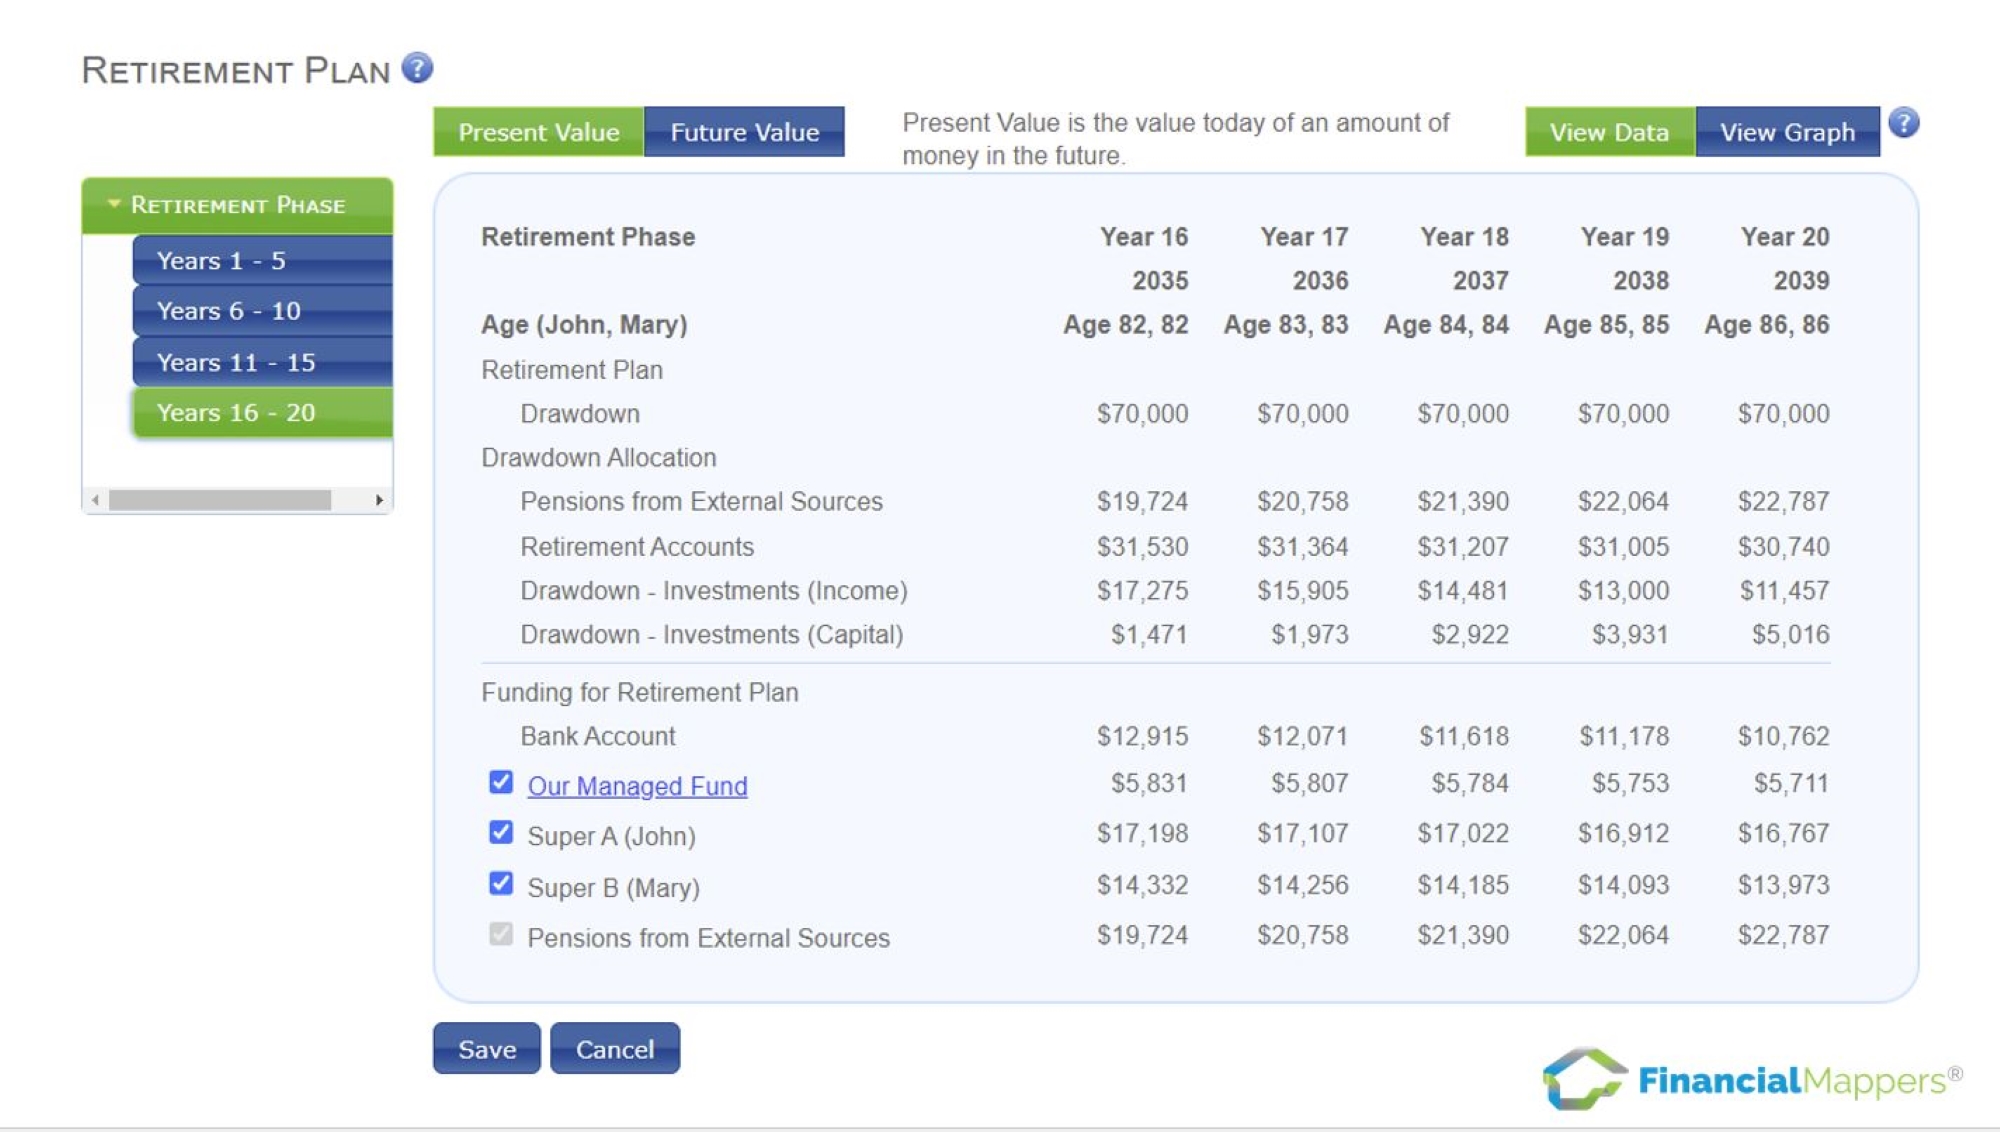 Screenshot of Data view of Retirement Plan, showing Drawdown Allocation and accounts from which Drawdown is funded in Financial Mappers.